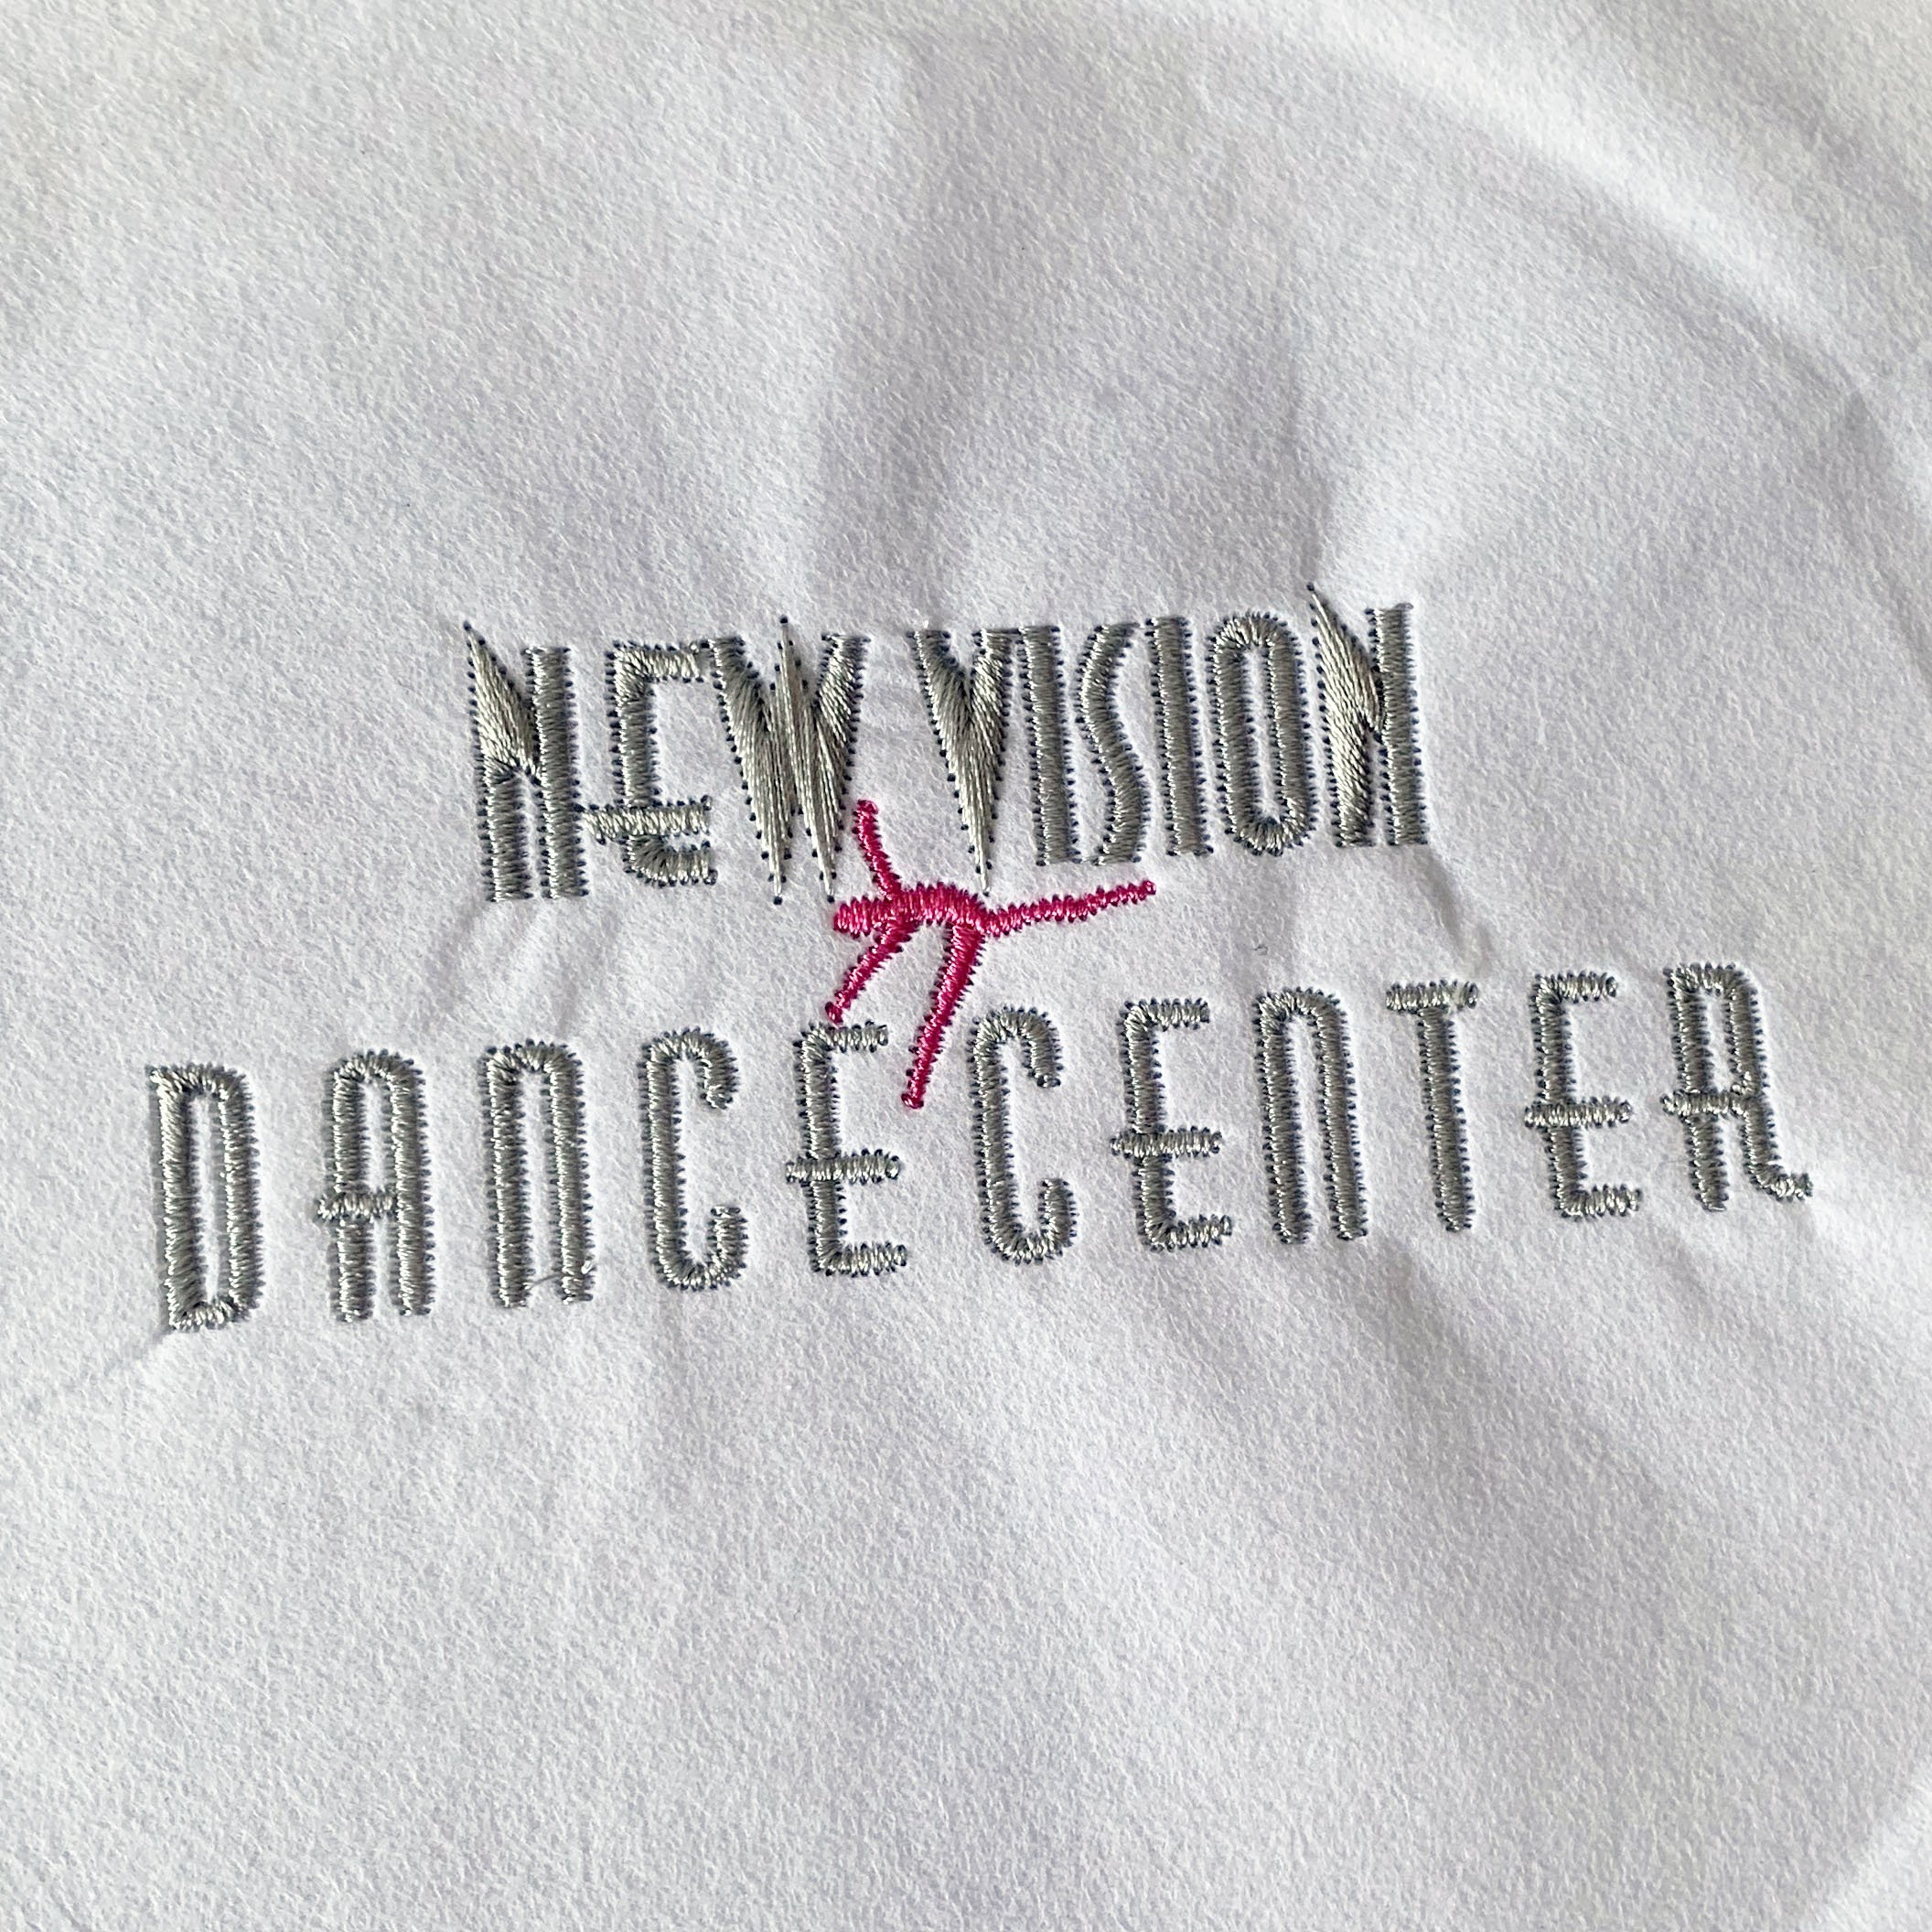 Embroidered Logo: a simple logo with the words 'New Vision Dance Center' and a dancing pink figure